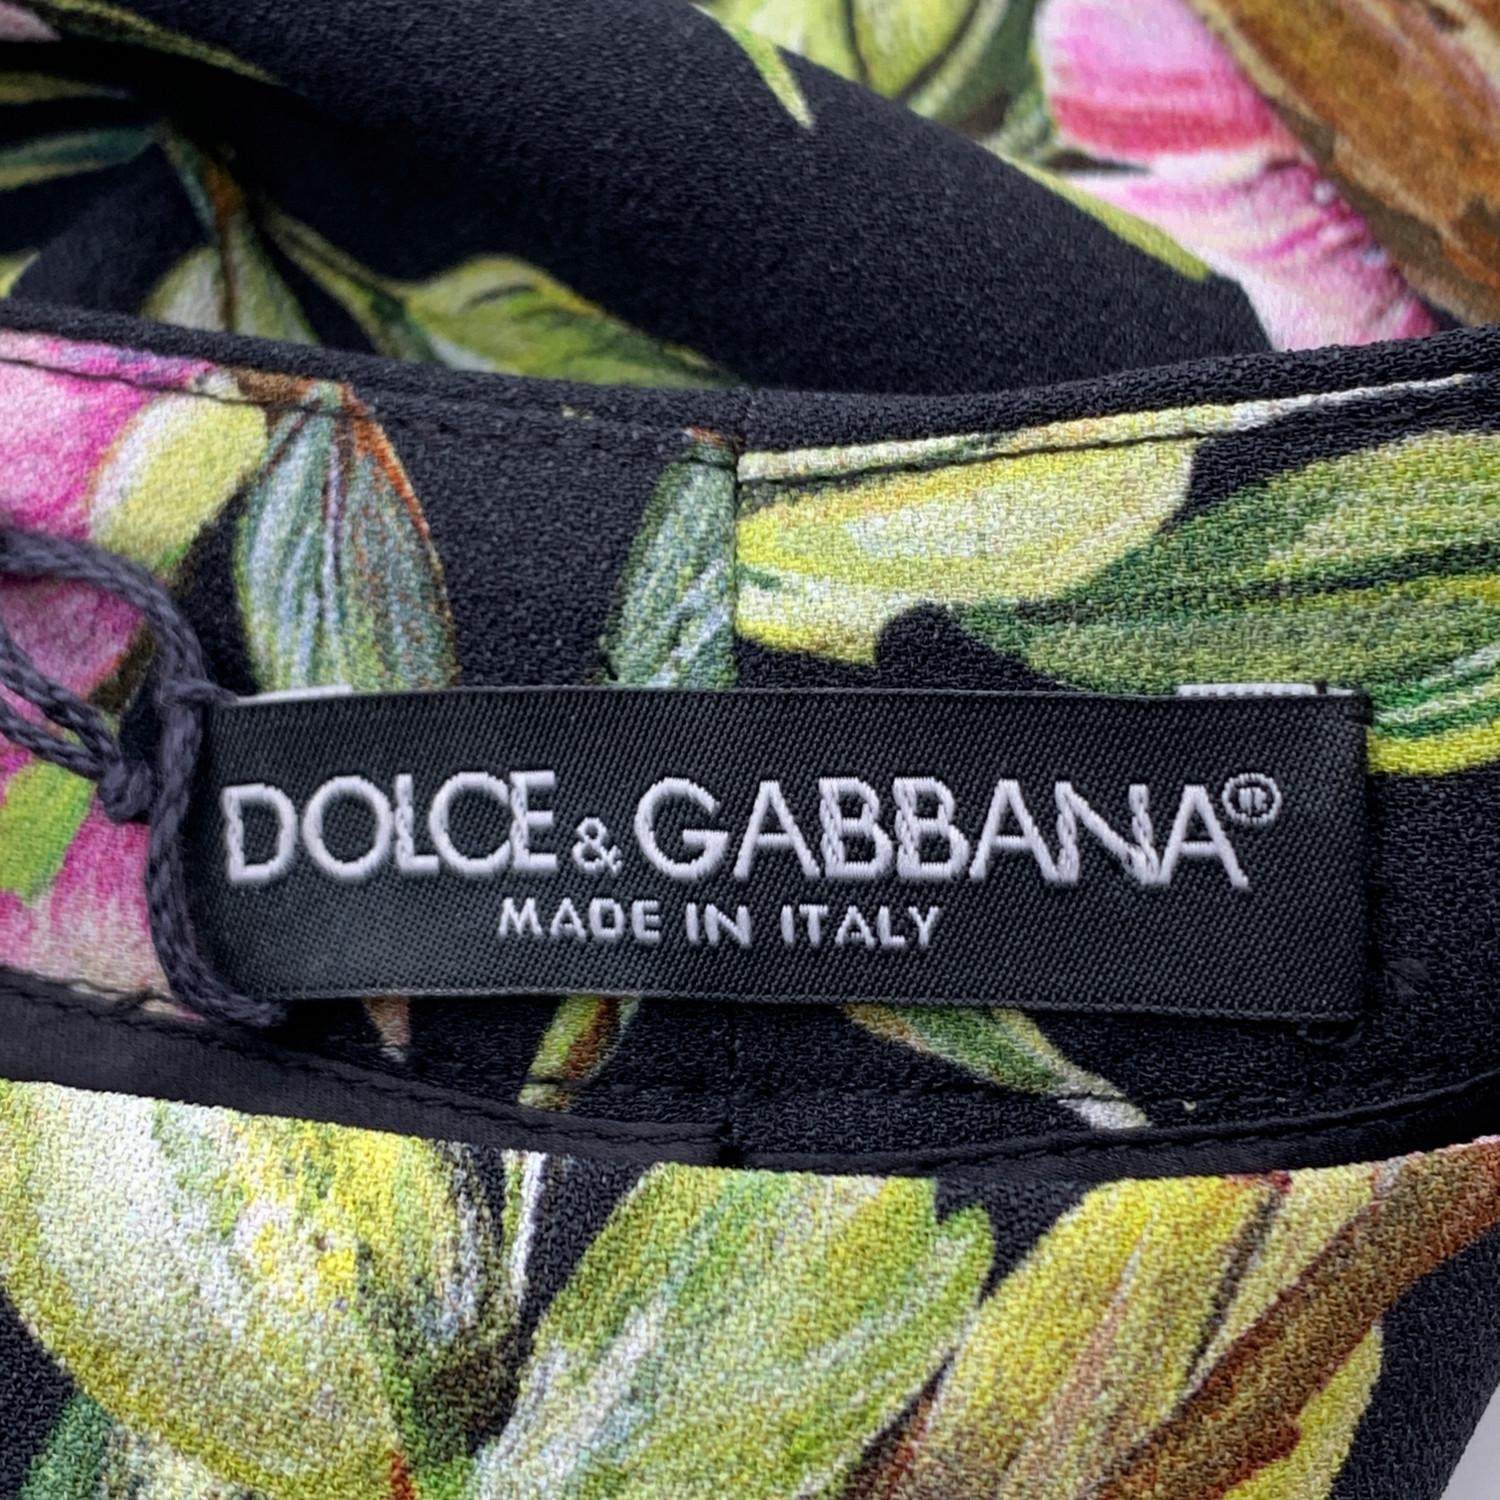 Dolce & Gabbana Floral Silky Fabric Pants with Zip Size S In Excellent Condition For Sale In Rome, Rome